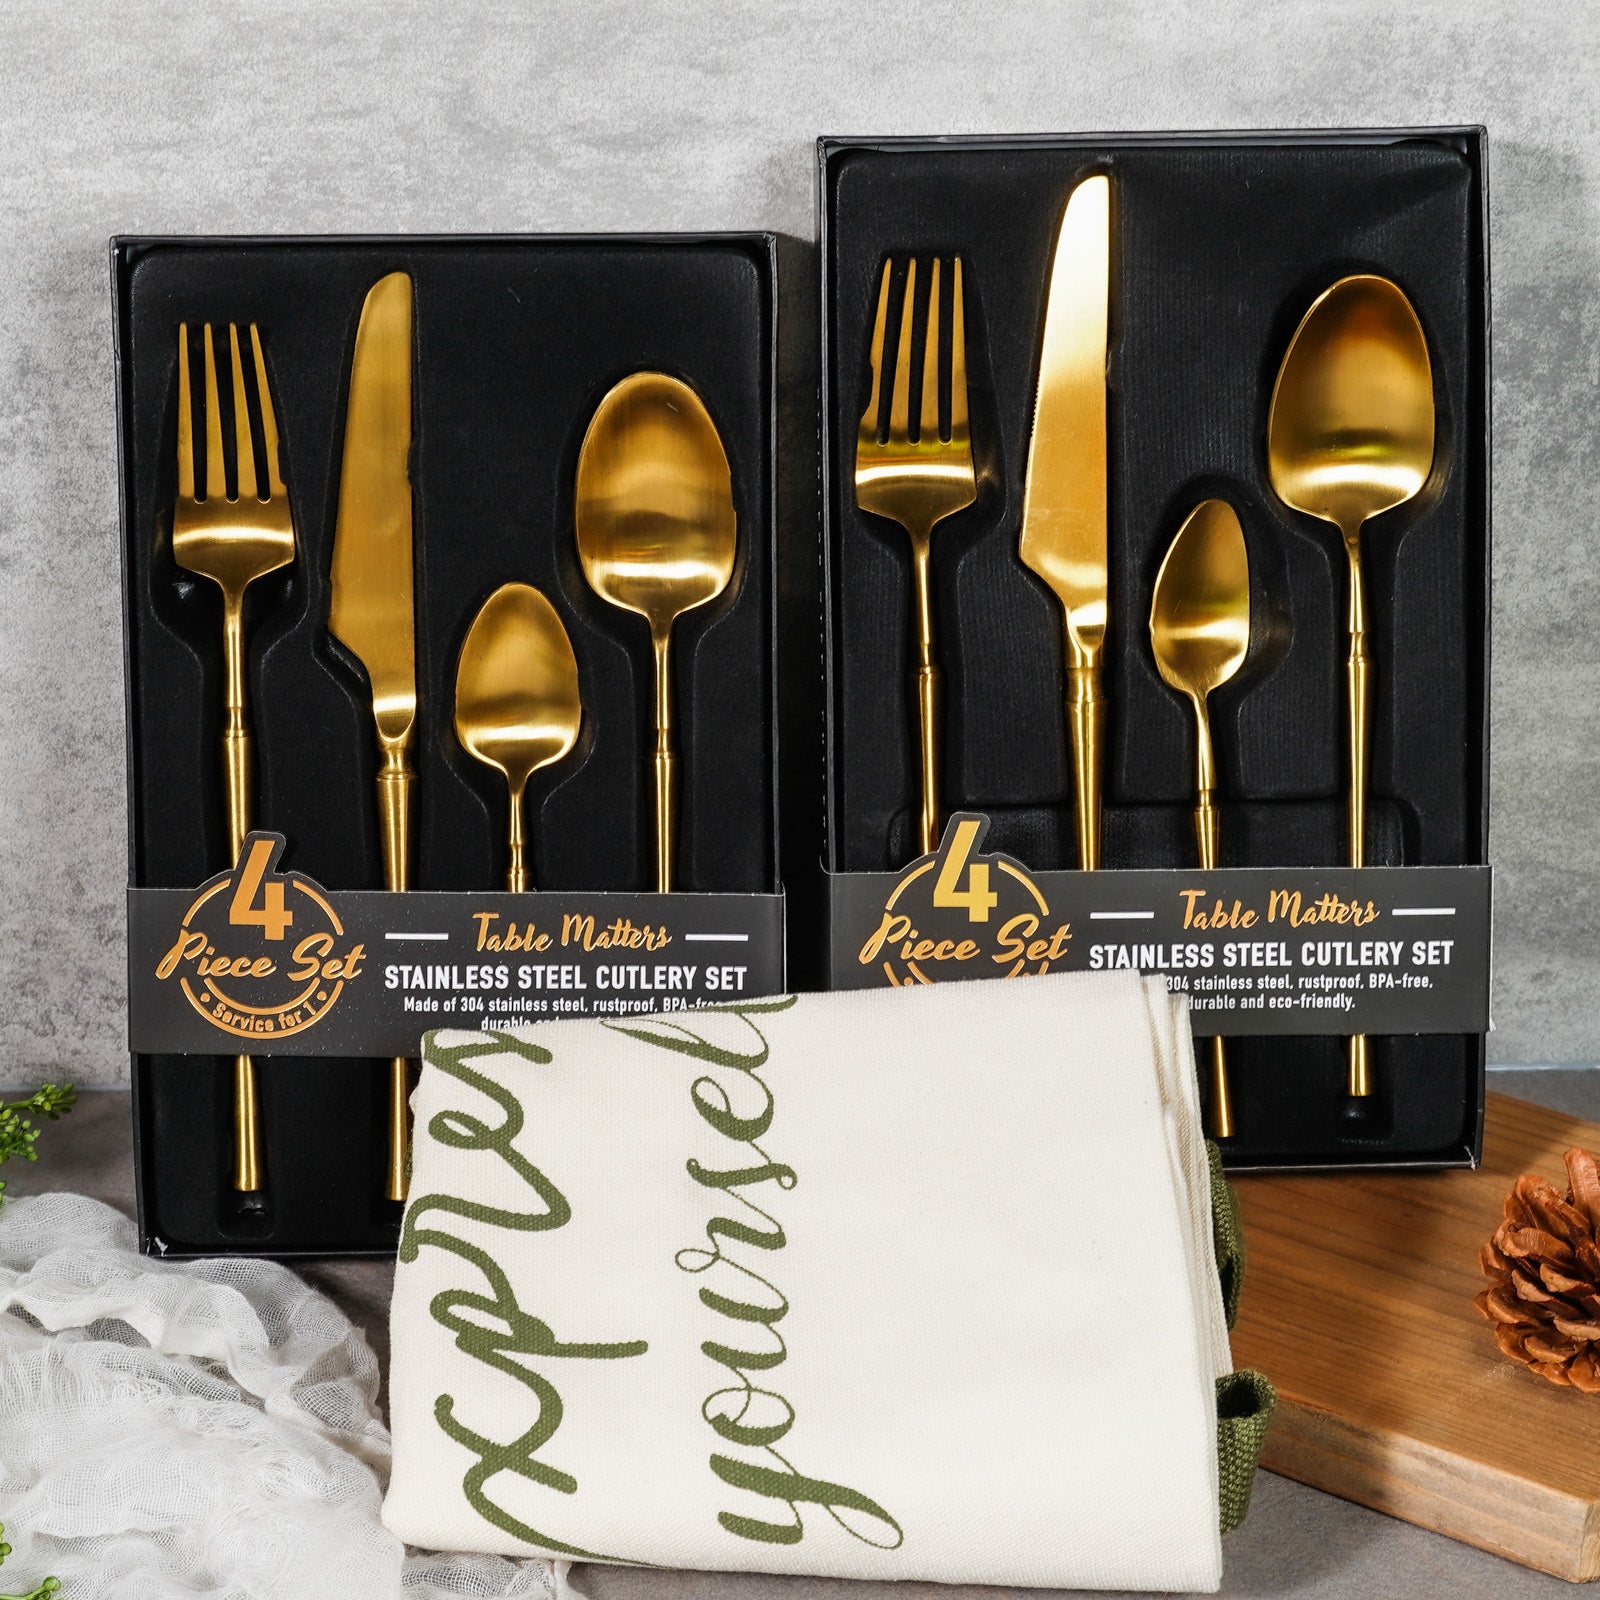 Bundle Deal - Parisian 4PC Stainless Steel Cutlery Set - Gold (Set of 2)